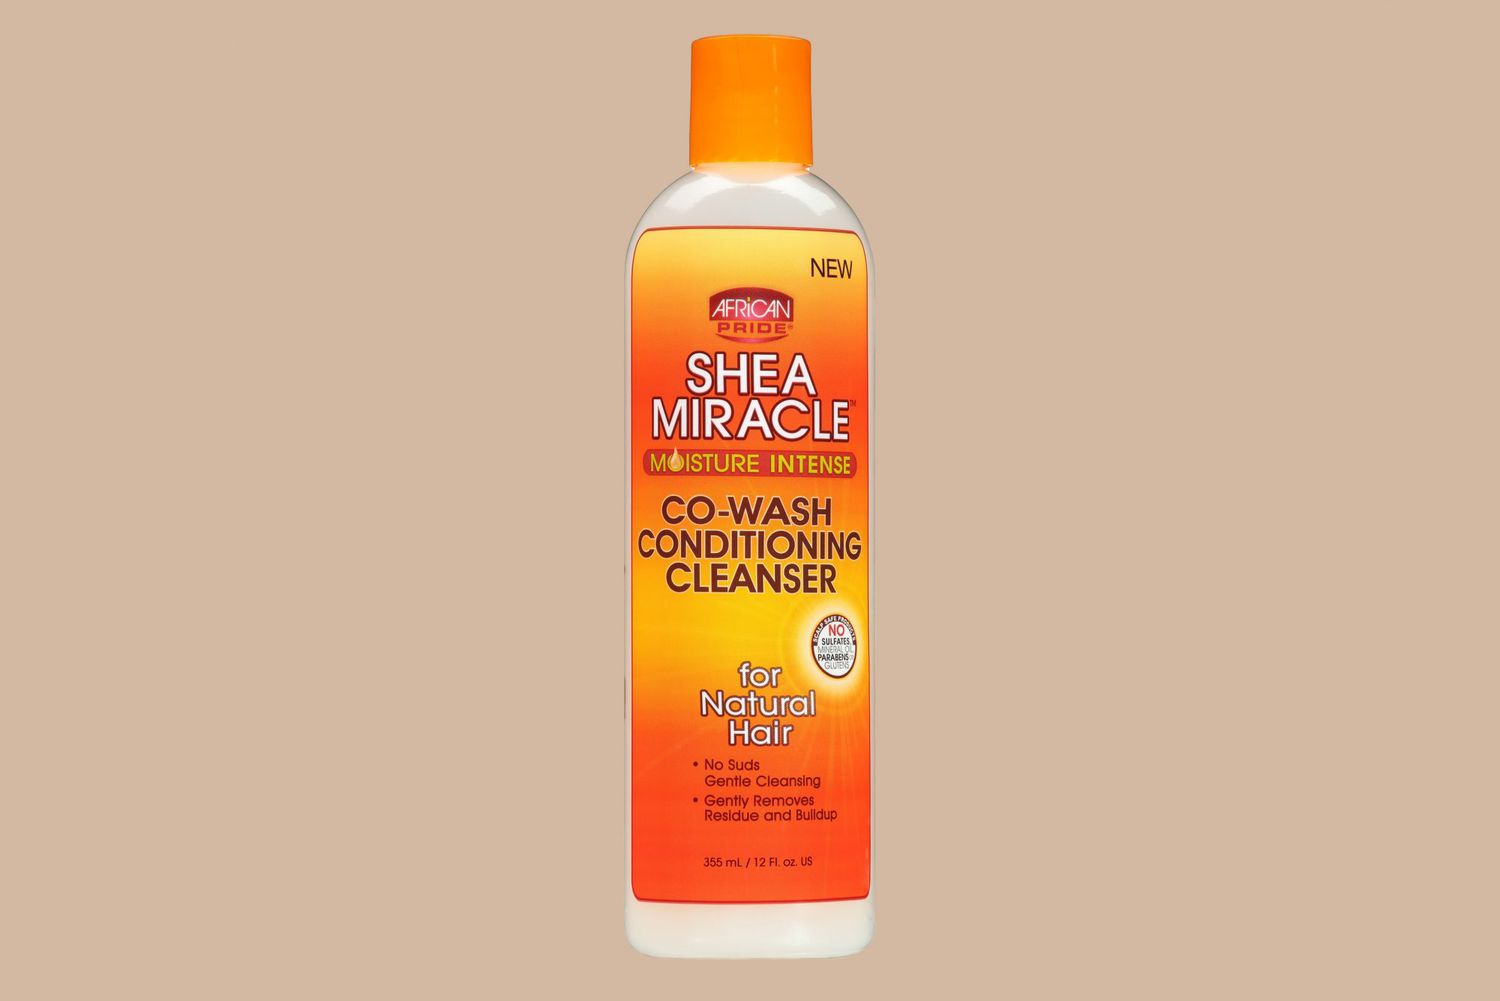 African Pride Shea Miracle Co-Wash Conditioning Cleanser